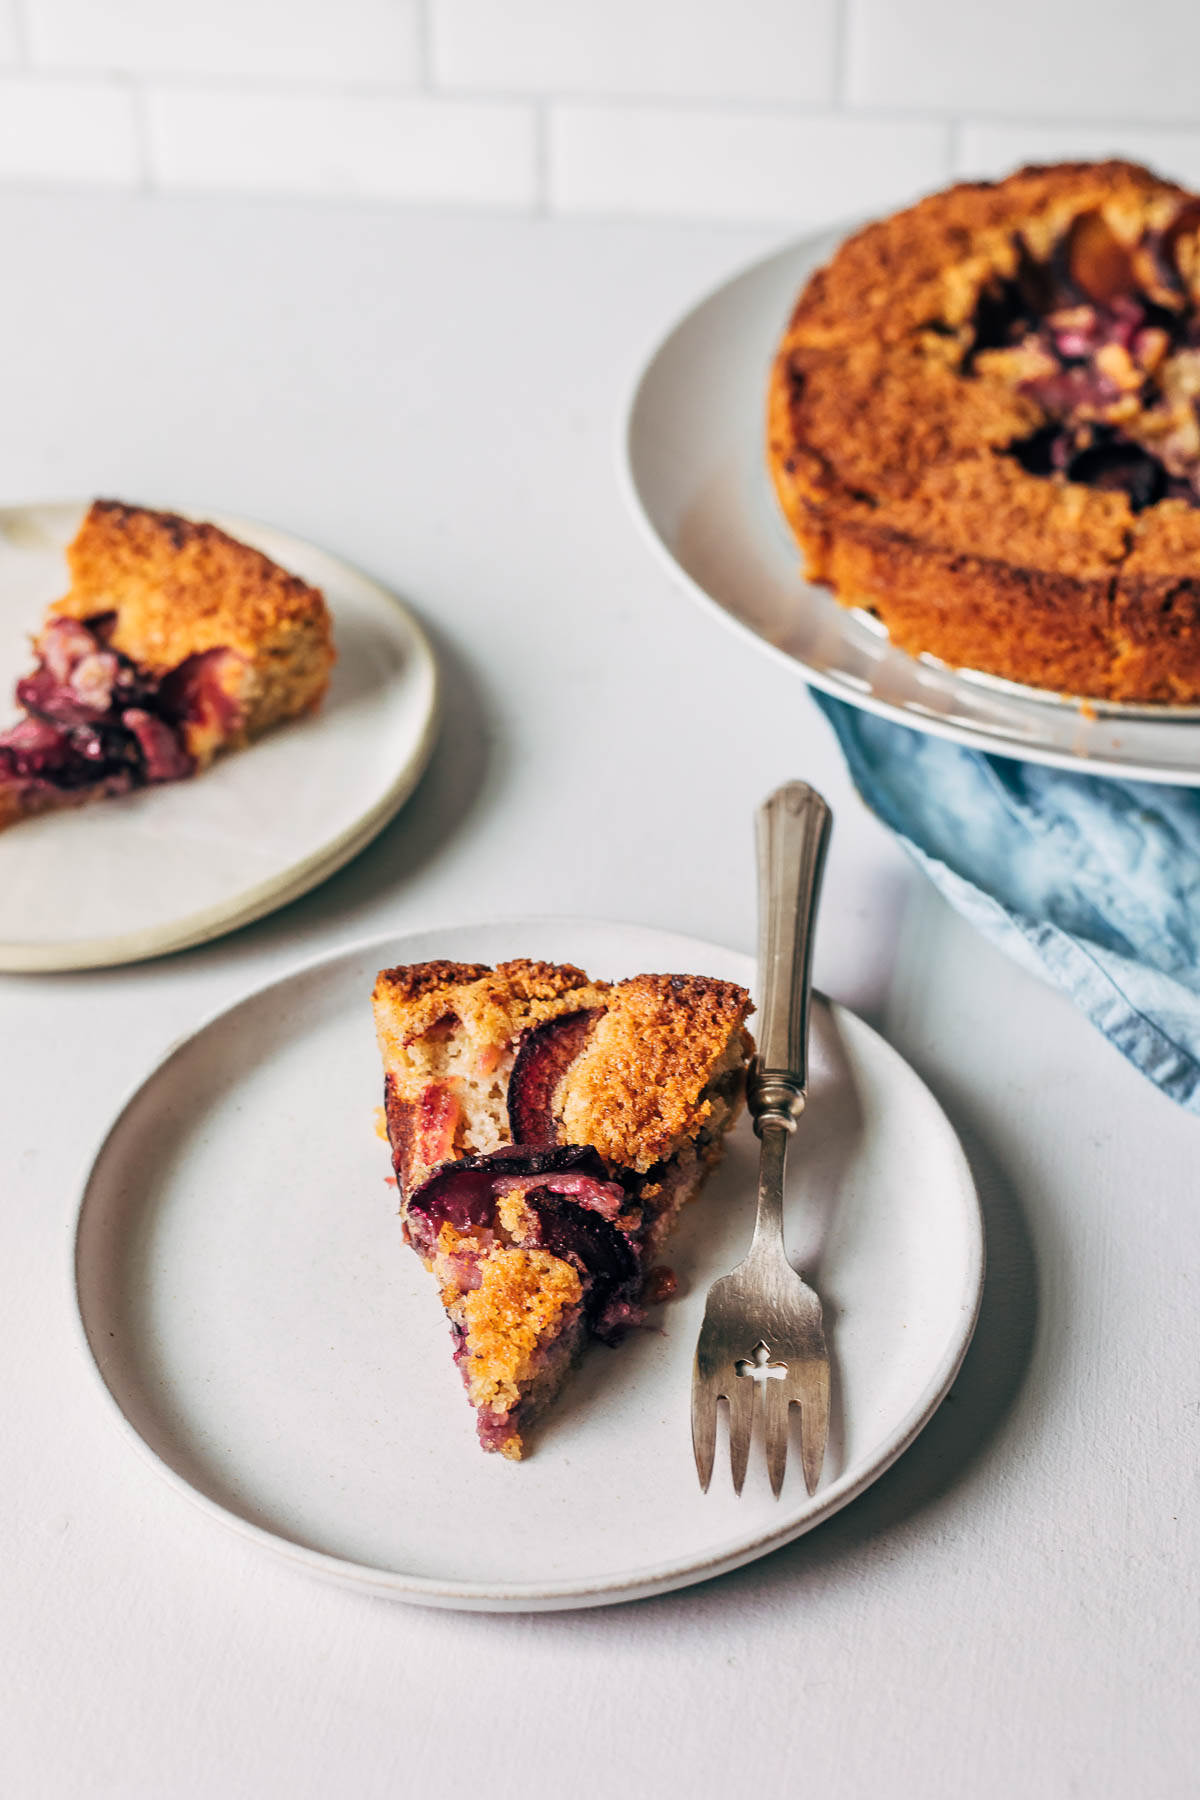 A slice of gluten-free plum cake on a plate with a fork next to another slice on a plate and the whole cake itself.